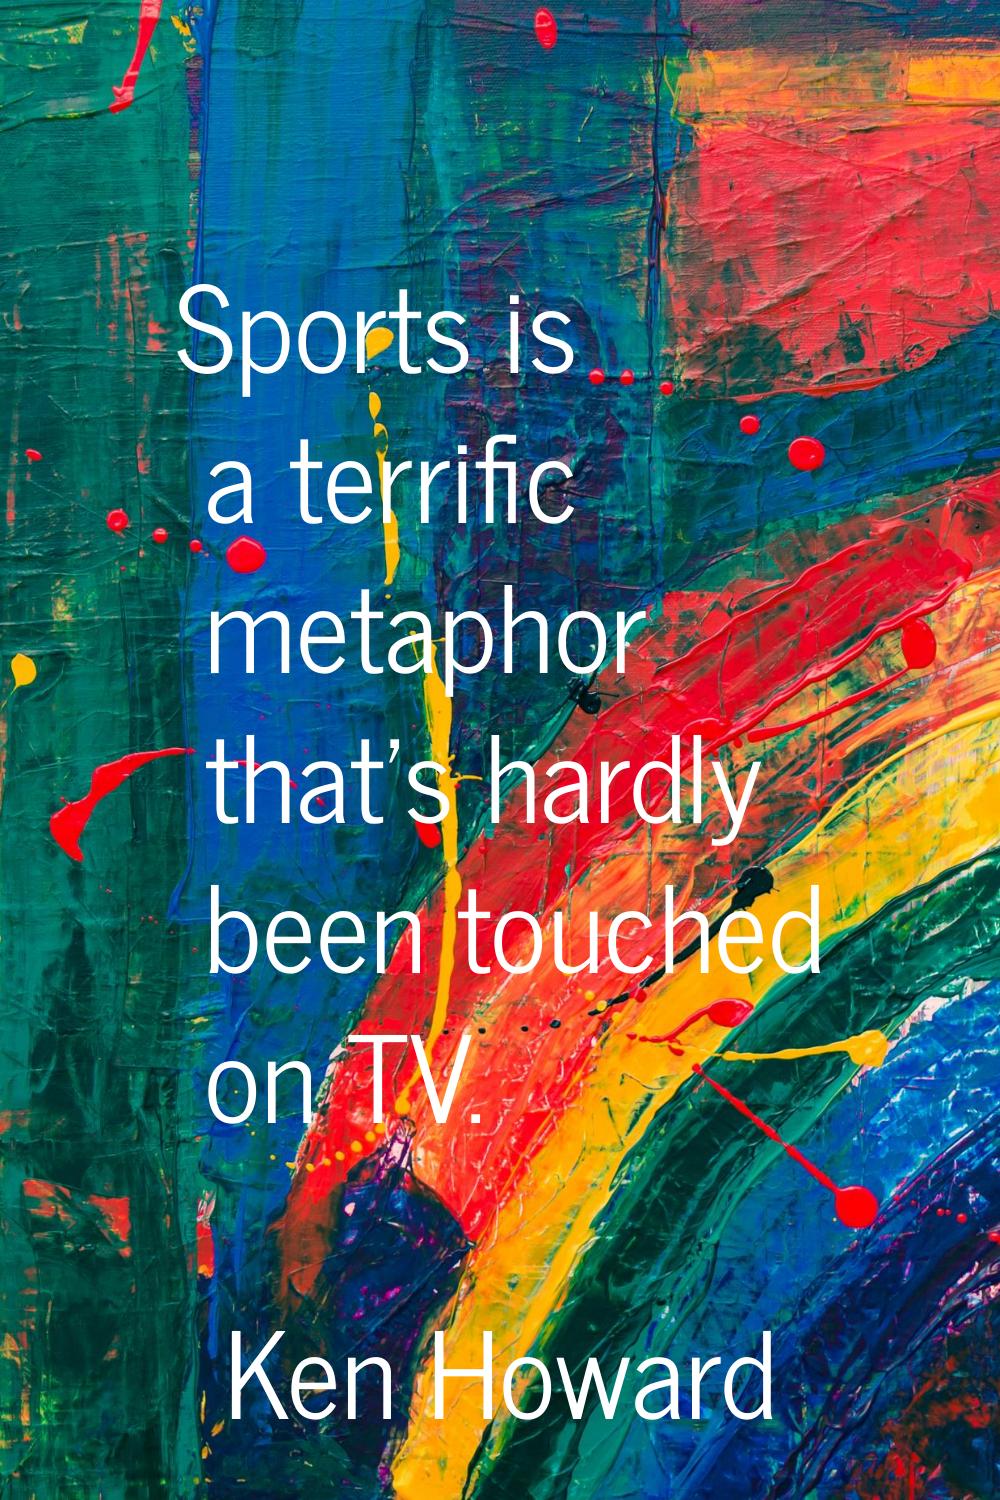 Sports is a terrific metaphor that's hardly been touched on TV.